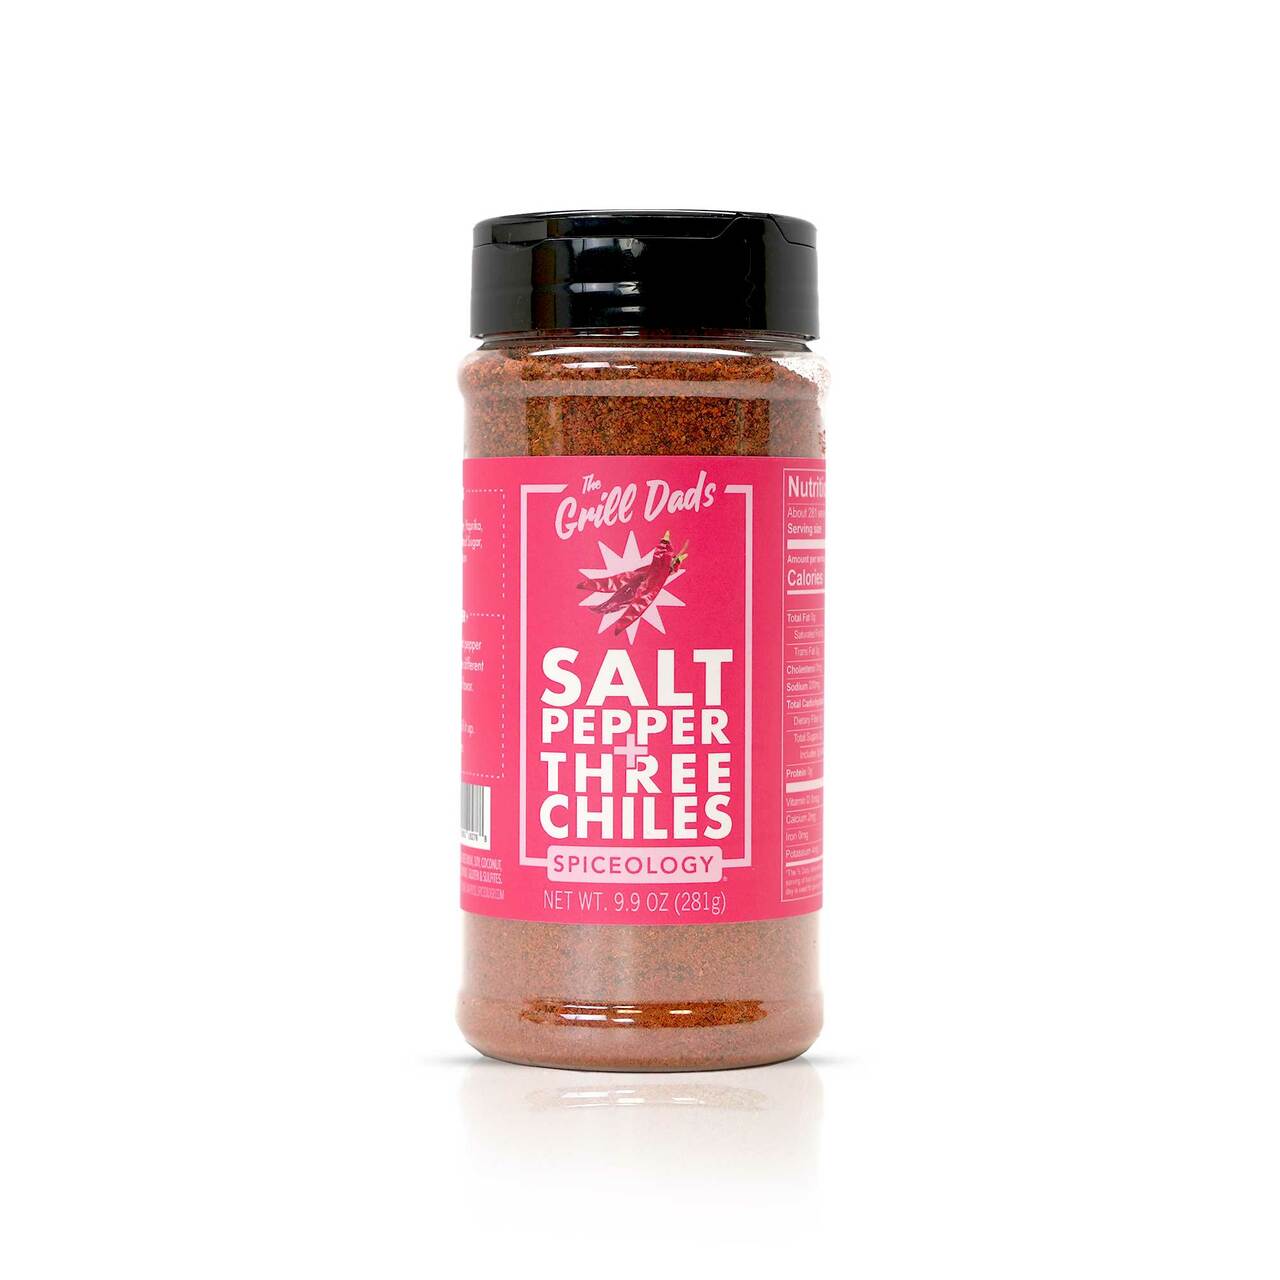 The Grill Dads x Spiceology Salt, Pepper & Three Chiles Seasoning